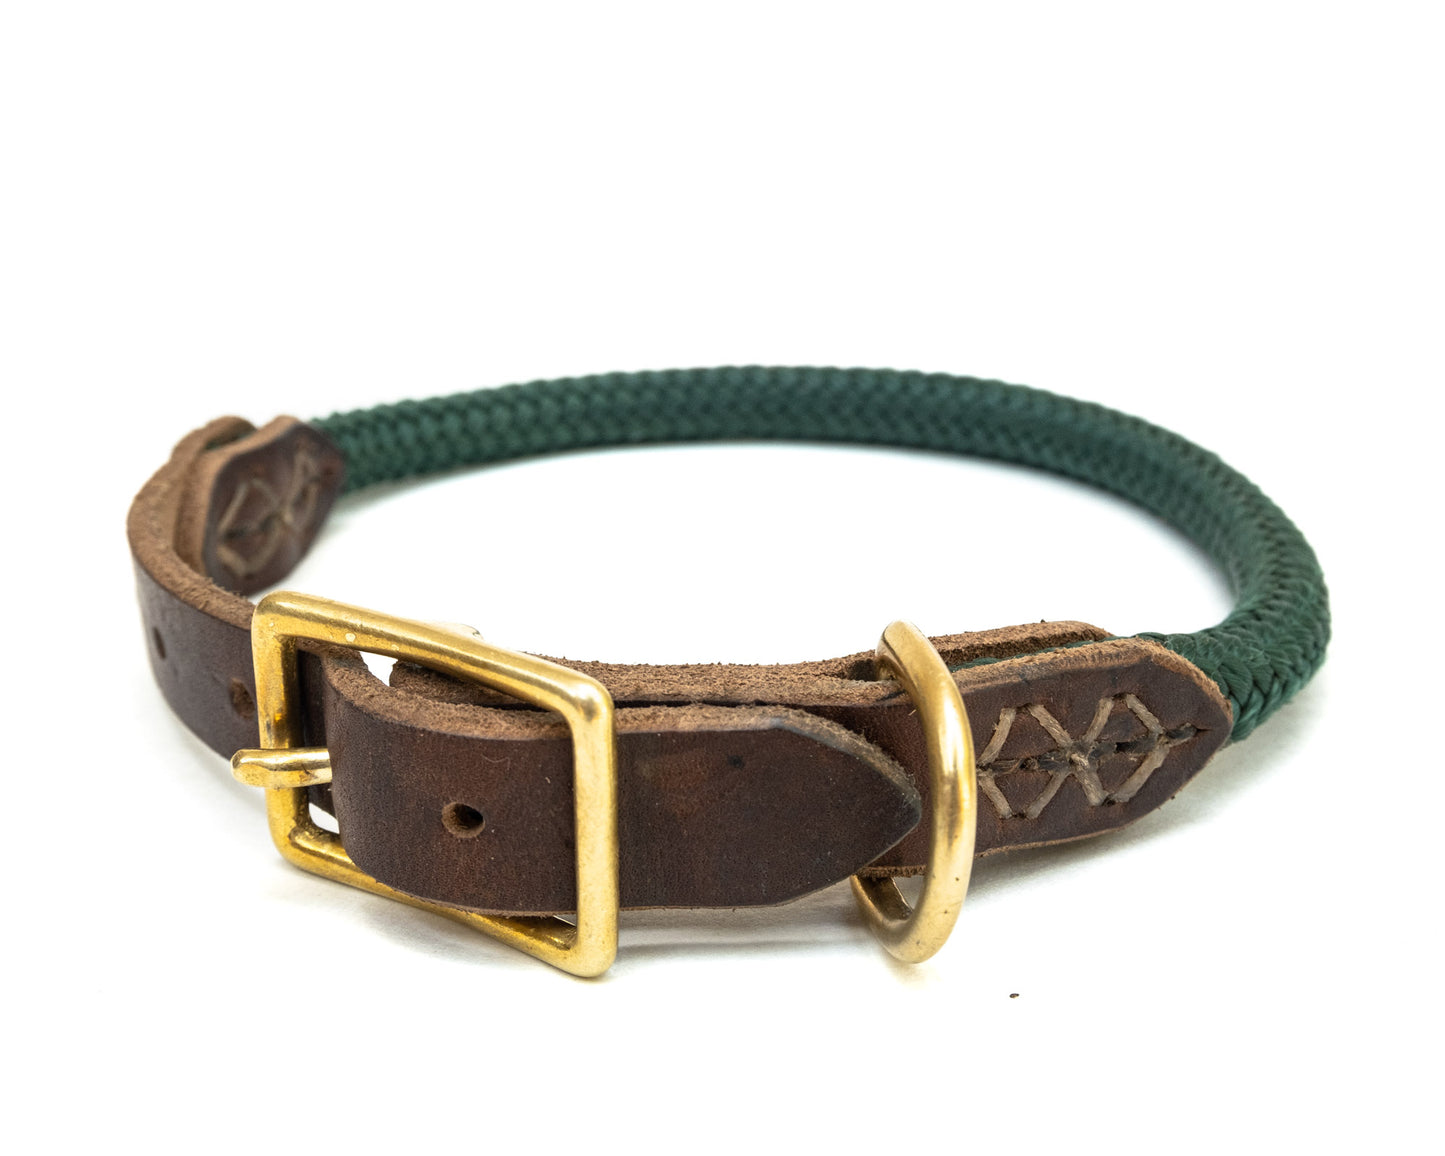 The Daily Adventure Collar